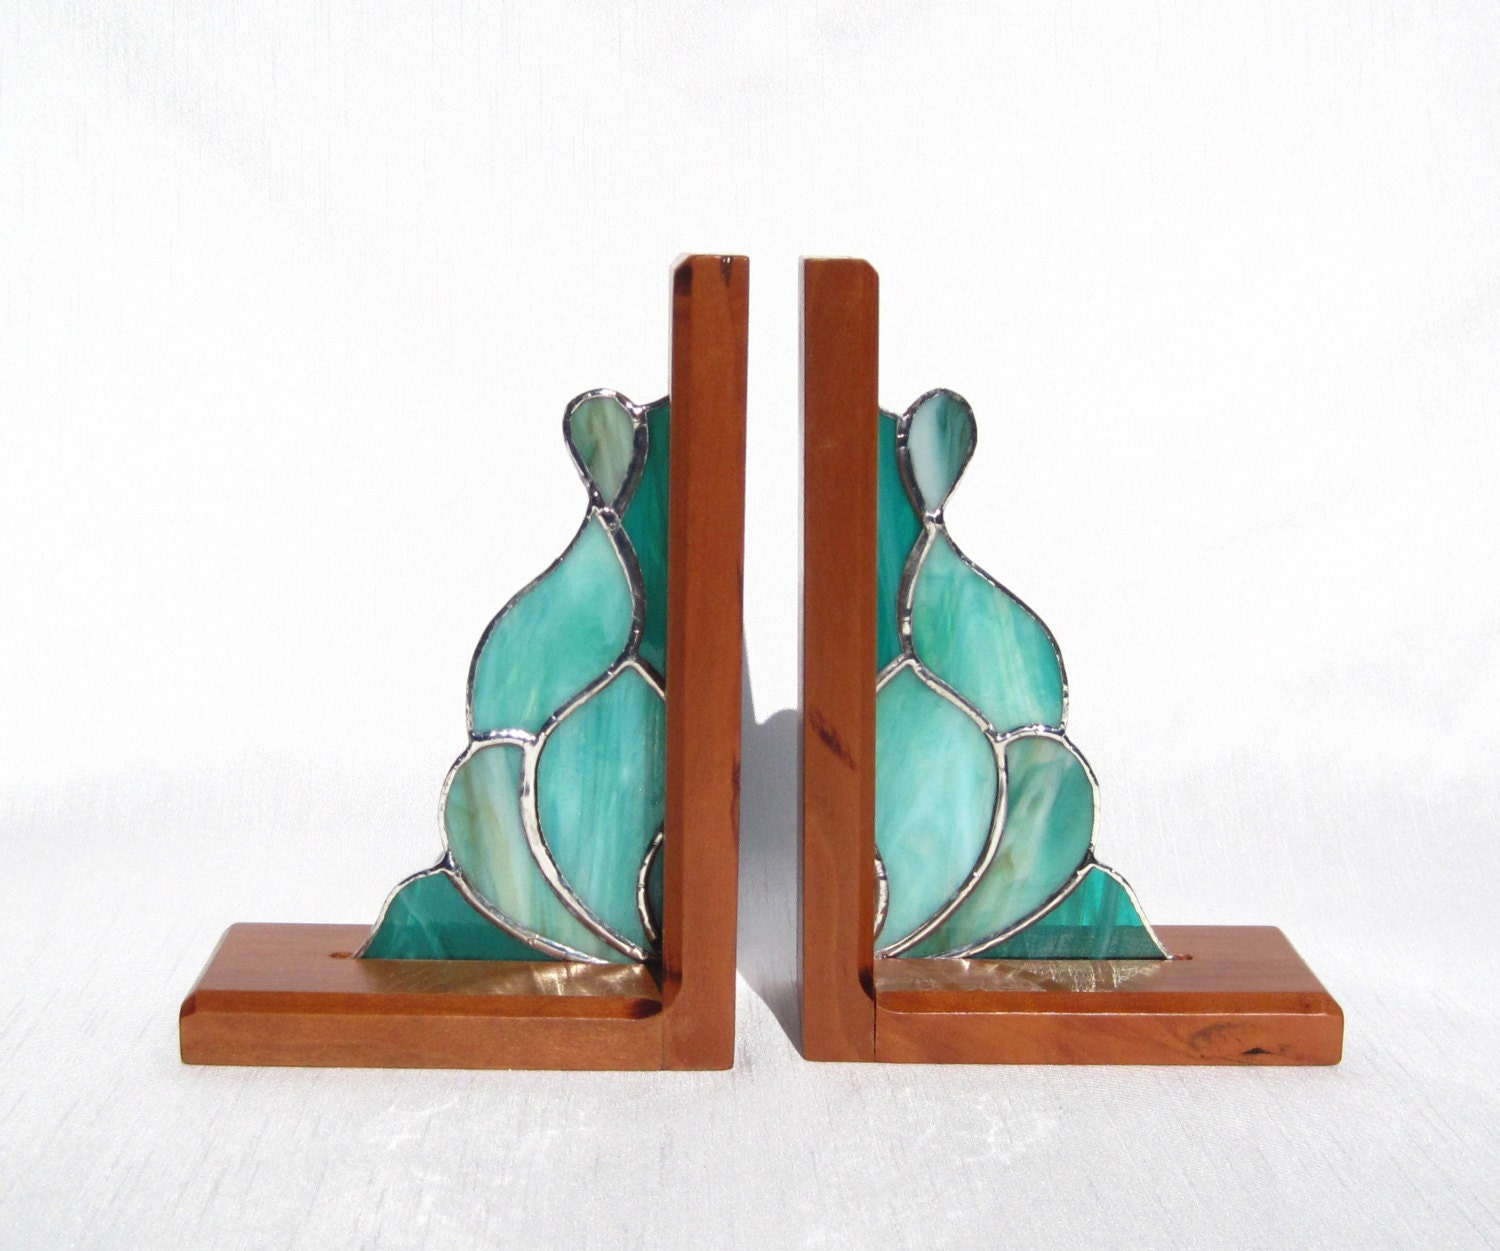 stained glass bookends